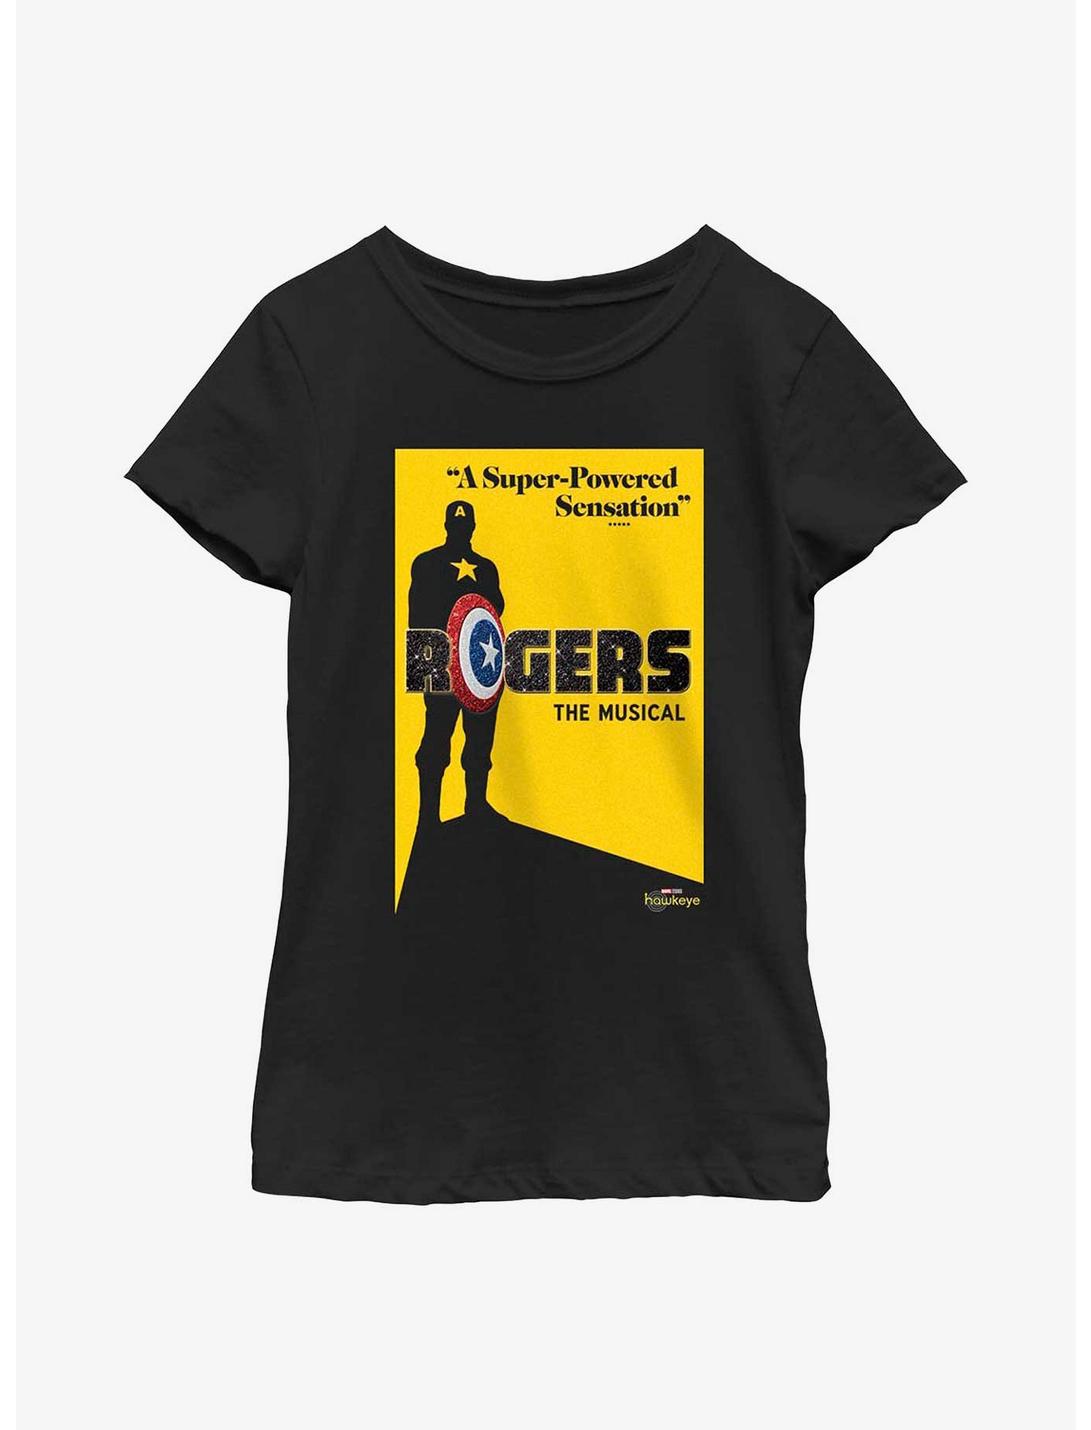 Marvel Hawkeye Rogers: The Musical Poster Youth Girls T-Shirt, BLACK, hi-res